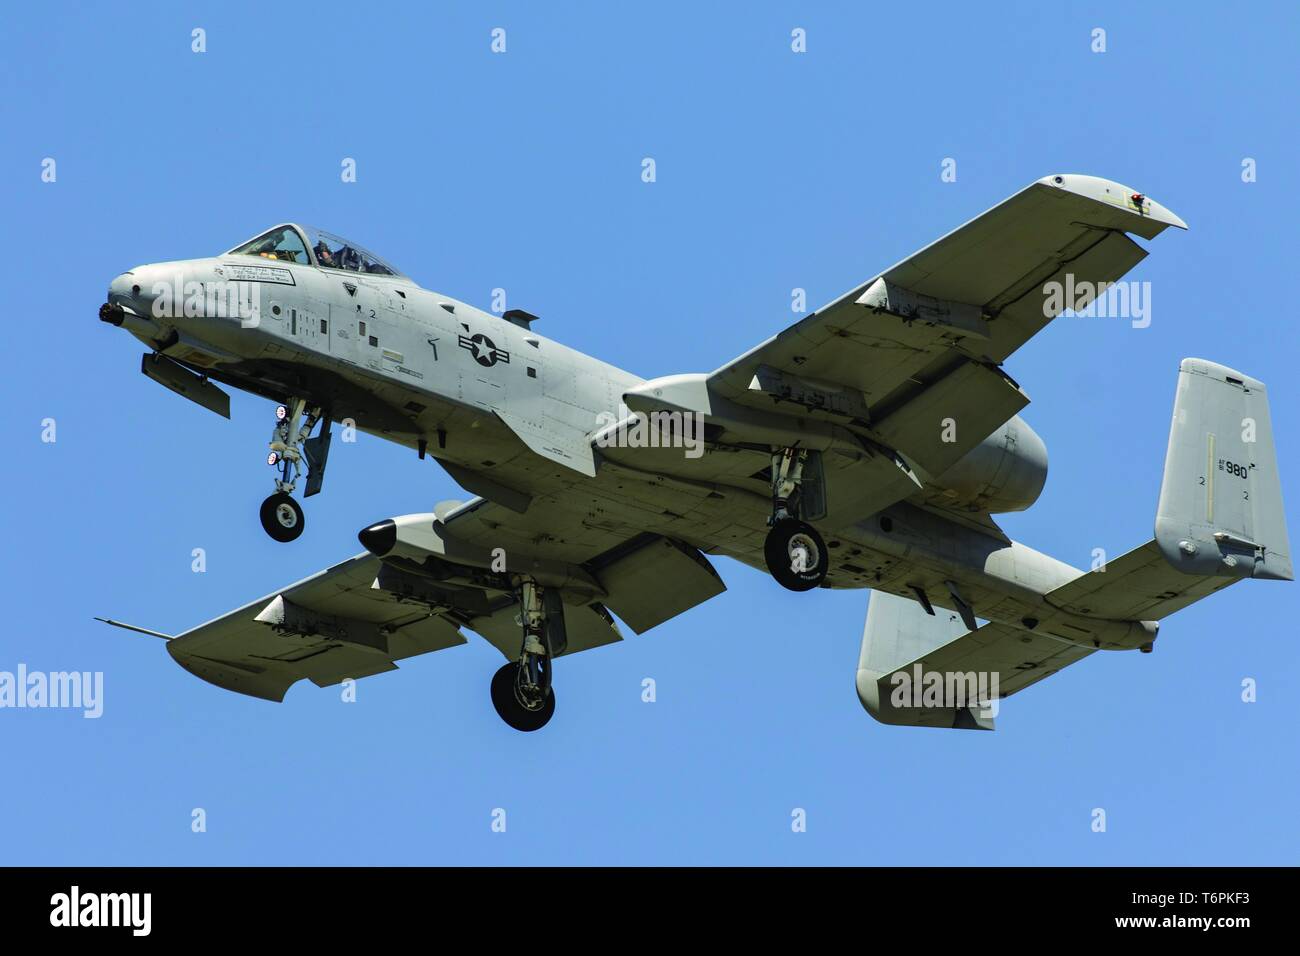 The A-10C Thunderbolt II Demonstration team performs at the Wings Over South Texas Airshow at Naval Air Station Corpus Christi, Texas, April 13-14, 2019. (U.S. Navy Photo by Joseph Kumzak) Stock Photo